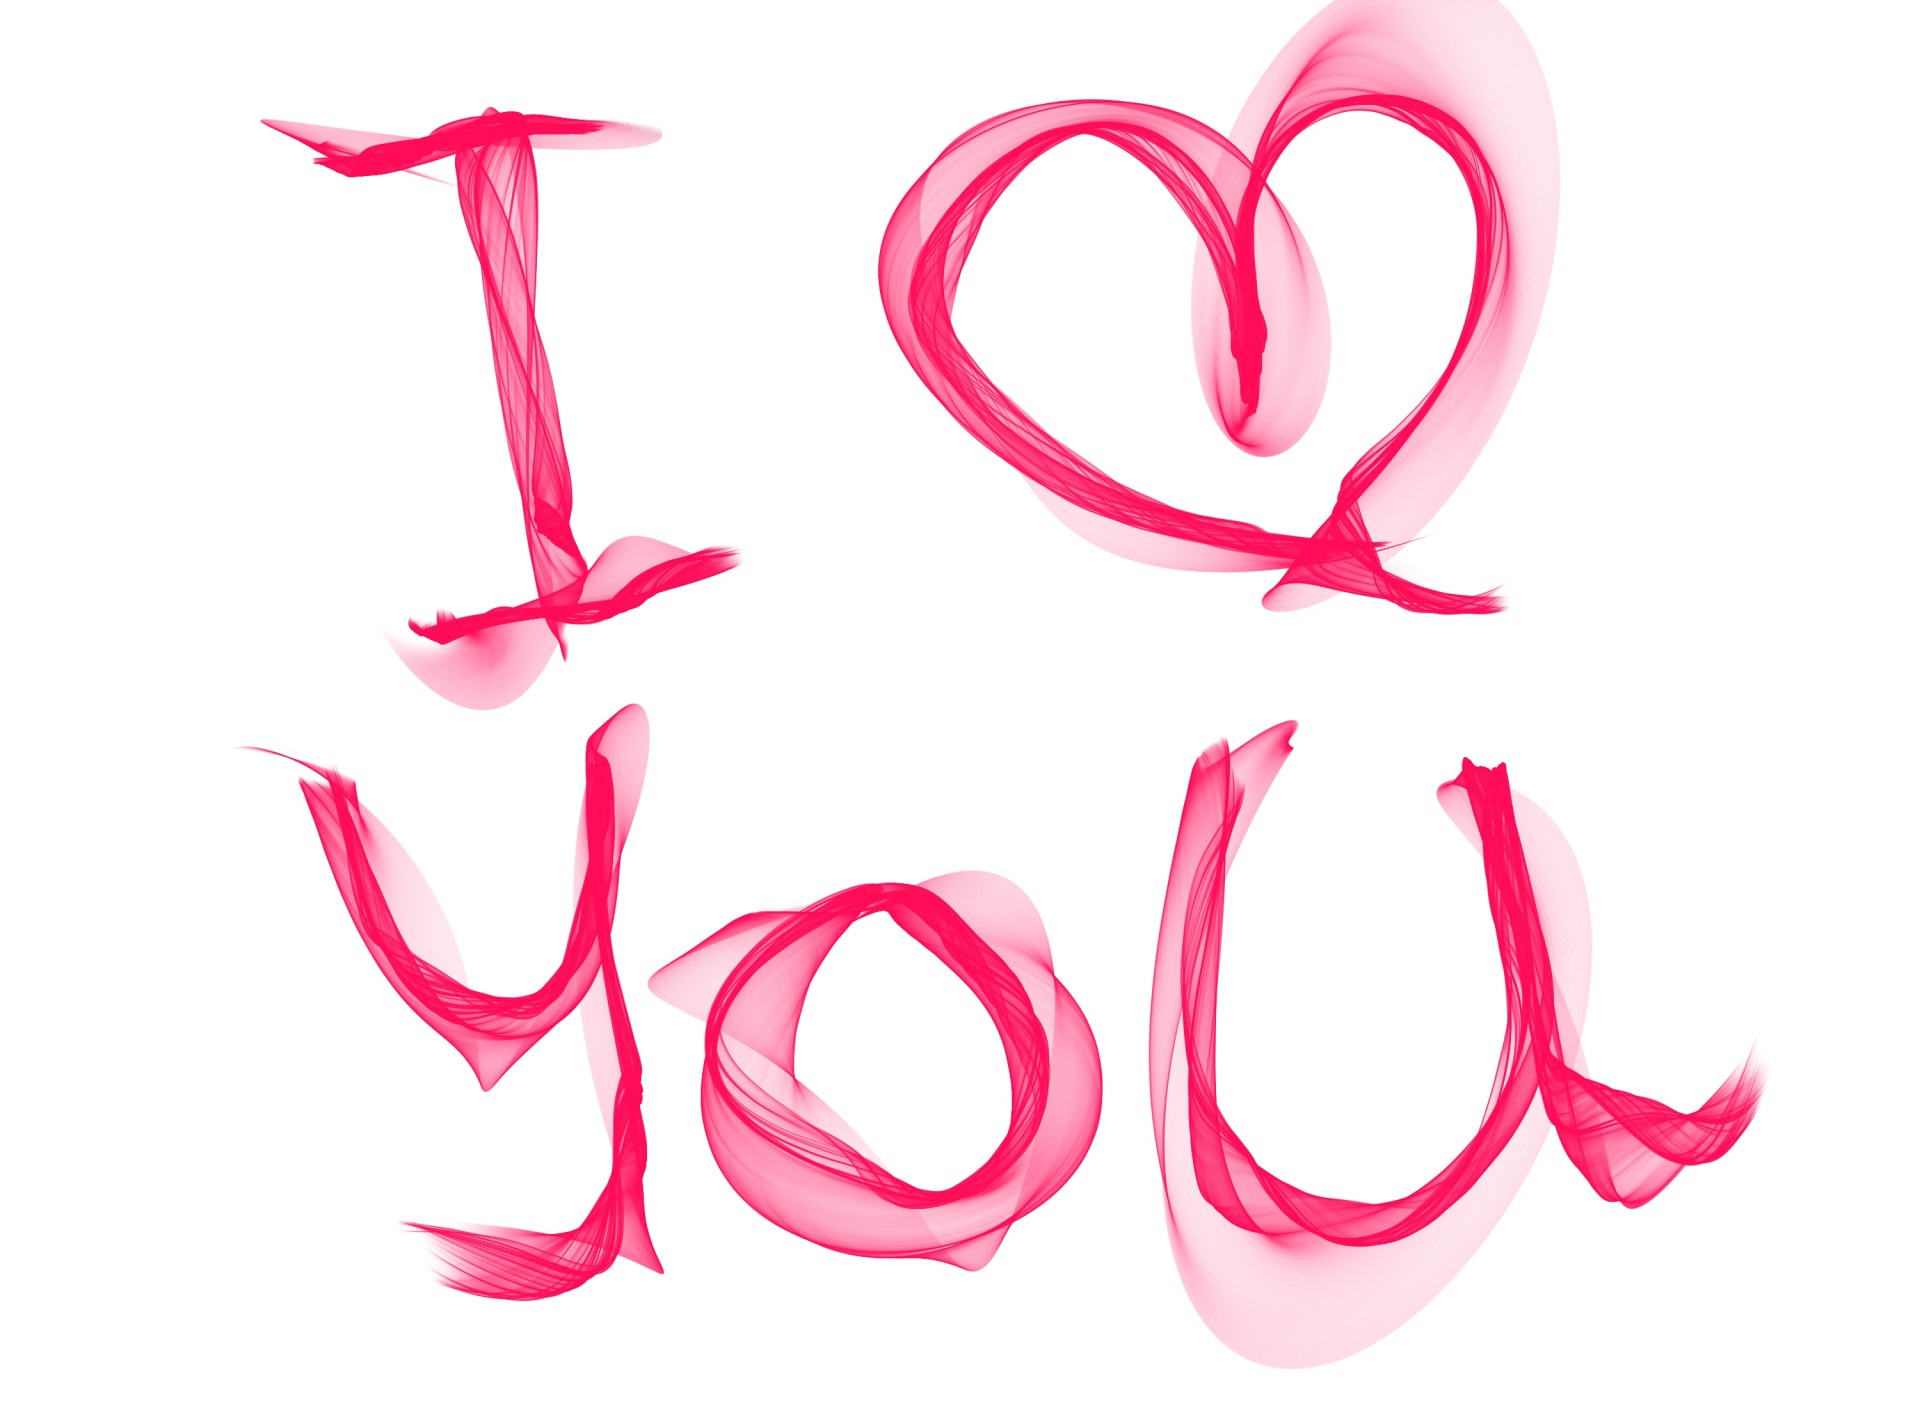 I Love You 2 Free Stock Photo - Public Domain Pictures